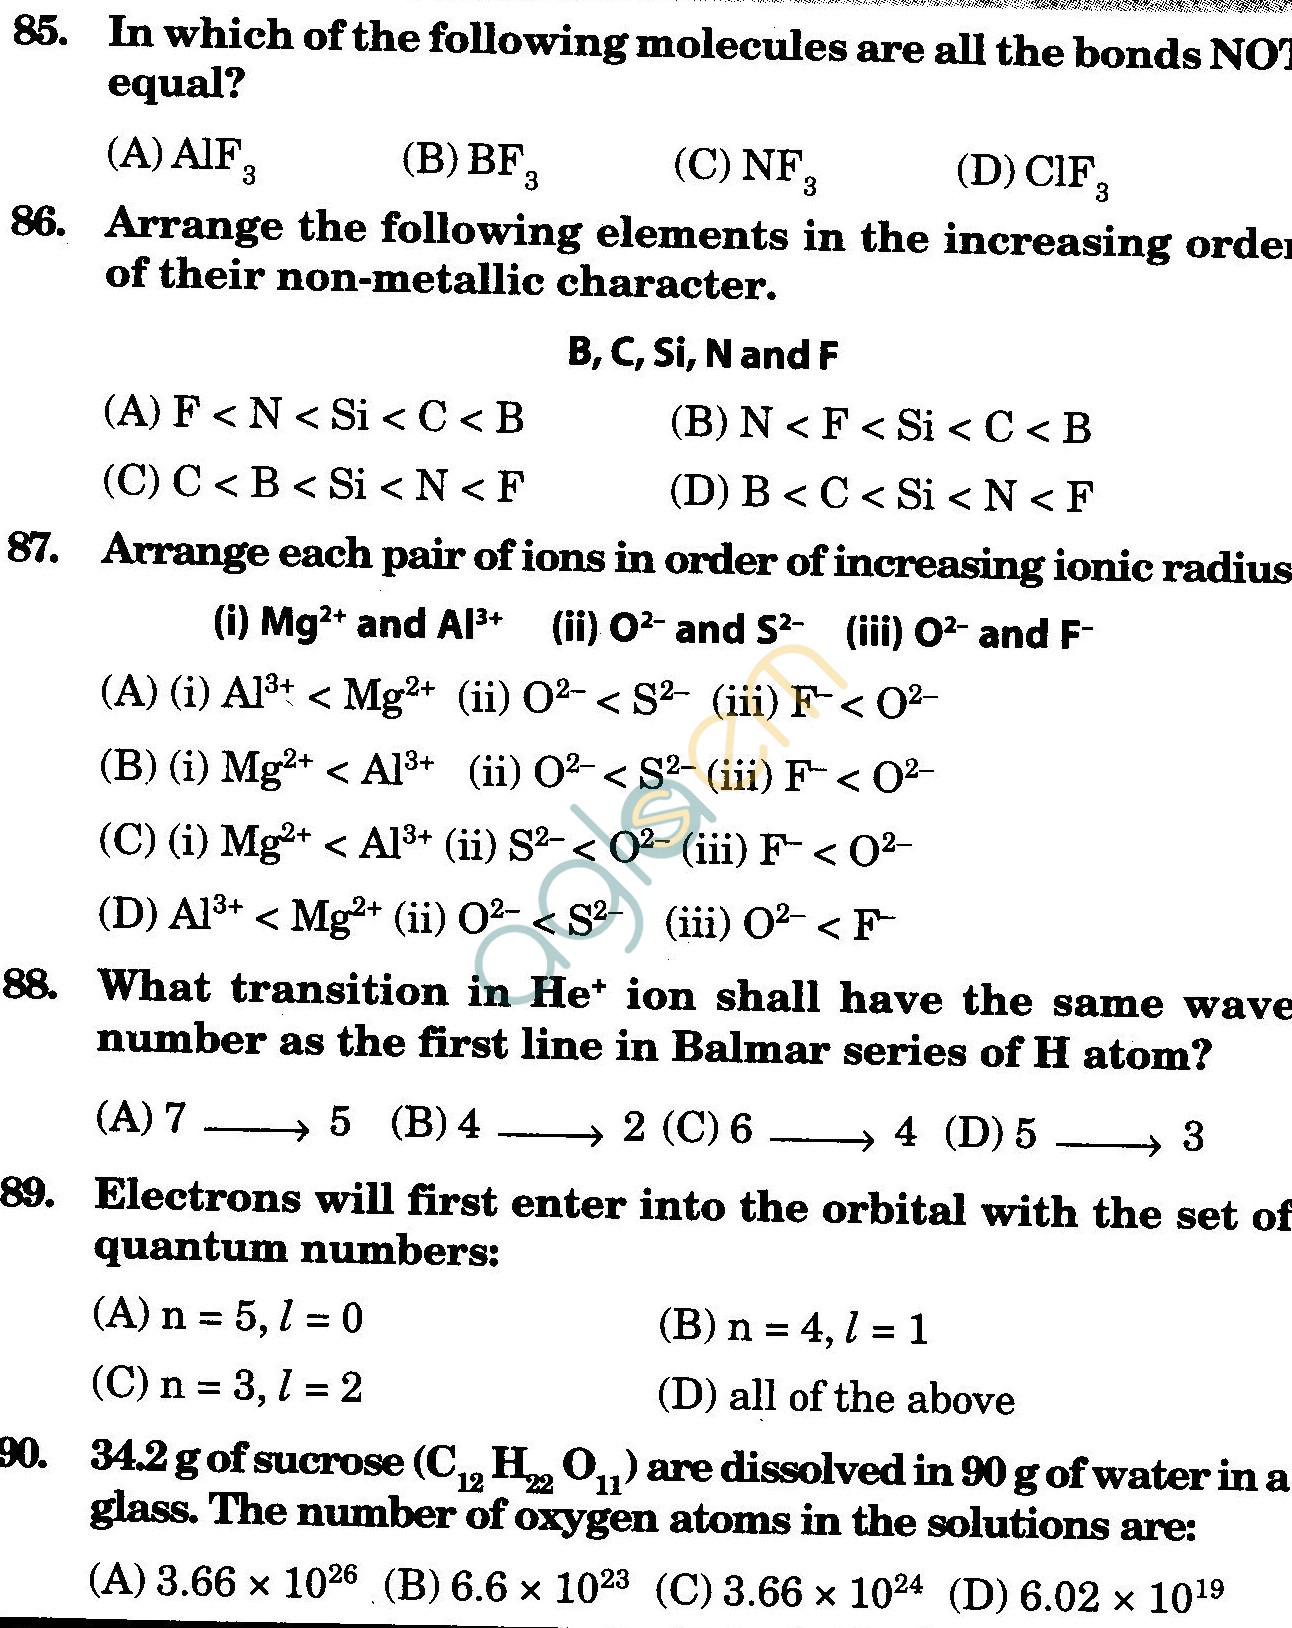 NSTSE 2009 Class XI PCM Question Paper with Answers - Chemistry